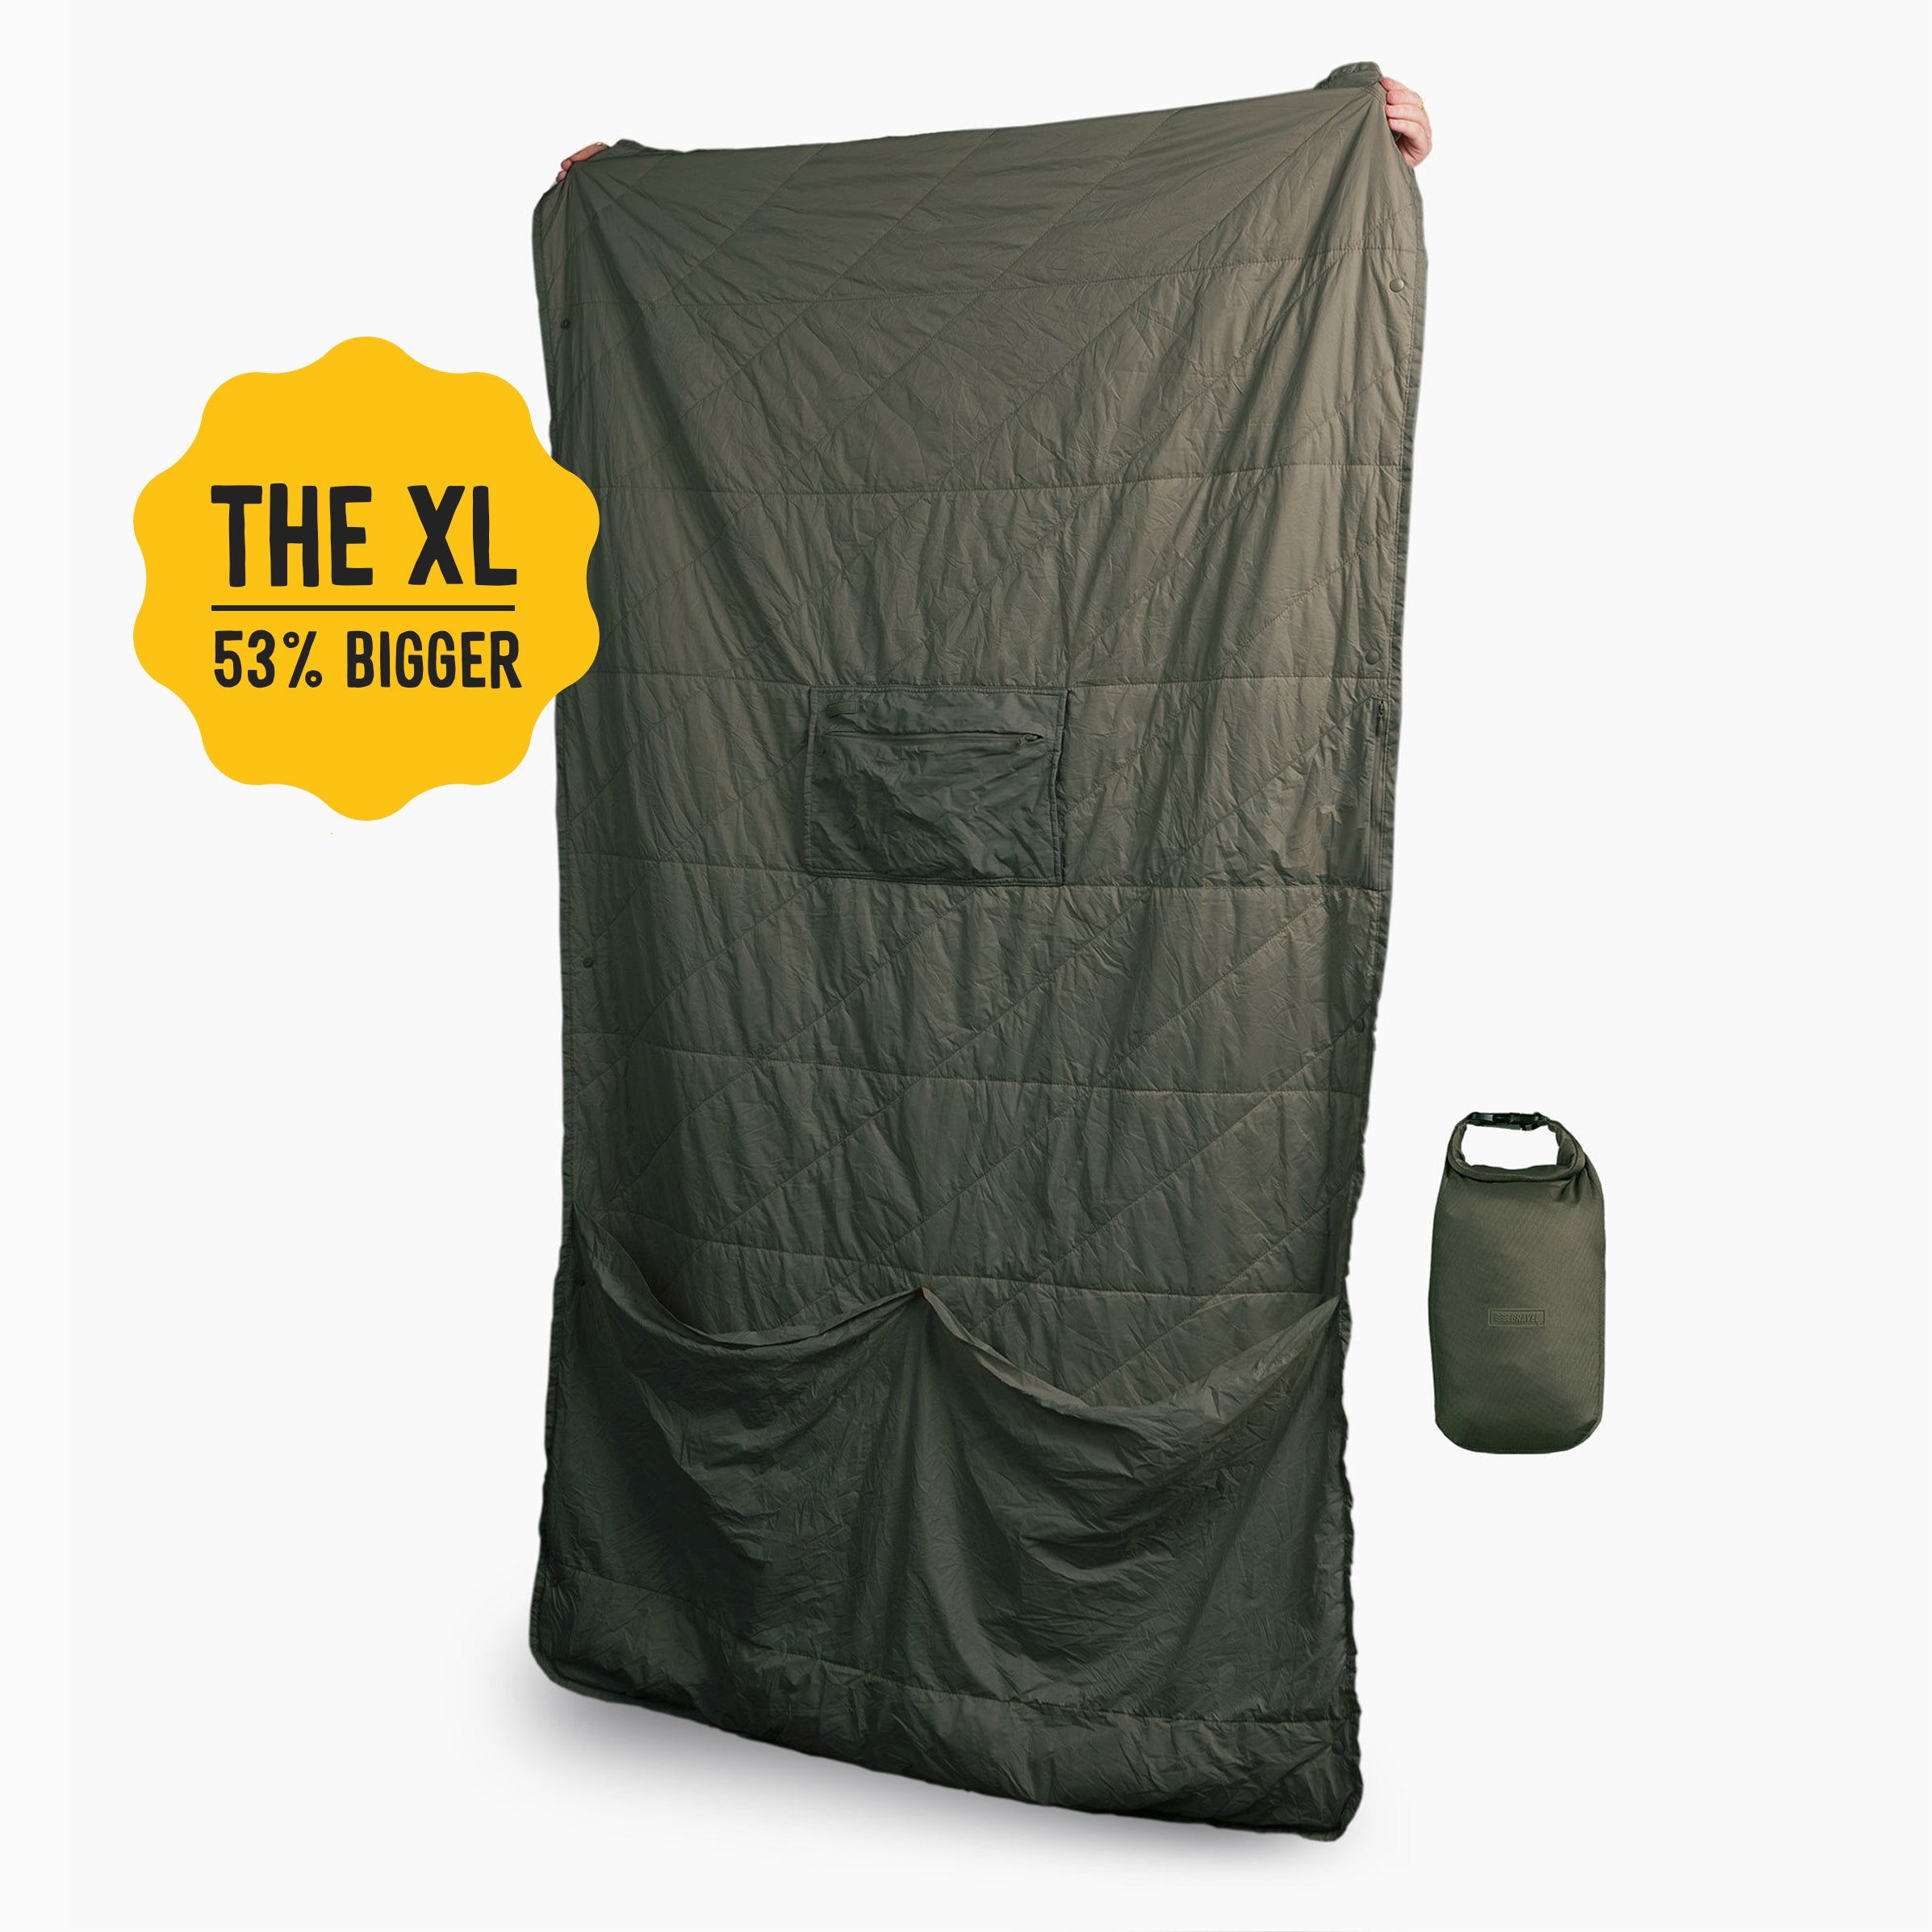 Layover™ XL Travel Blanket - Insulated & Packable | Spruce